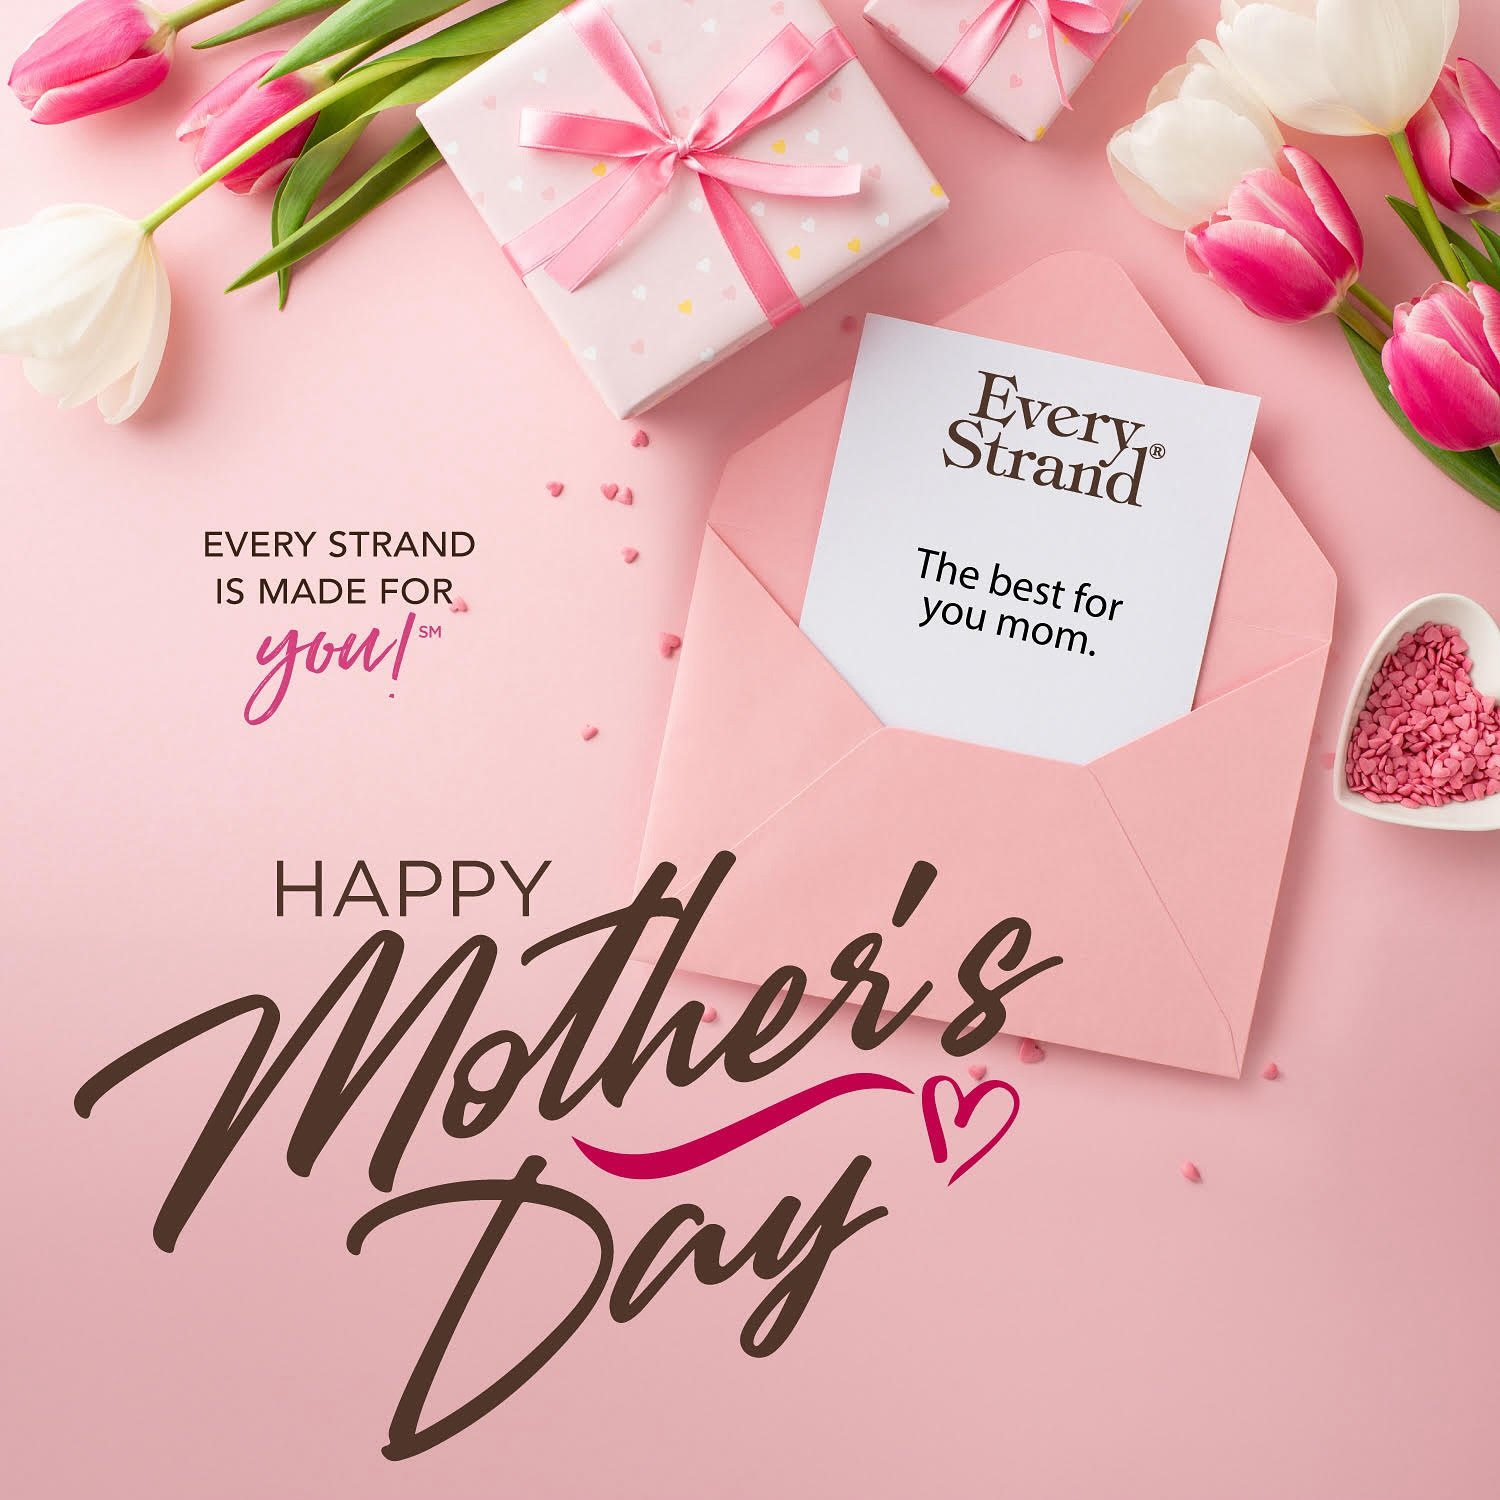 Happy Mother&rsquo;s Day from Every Strand to all the wonderful moms! 💕 🌸💝💗